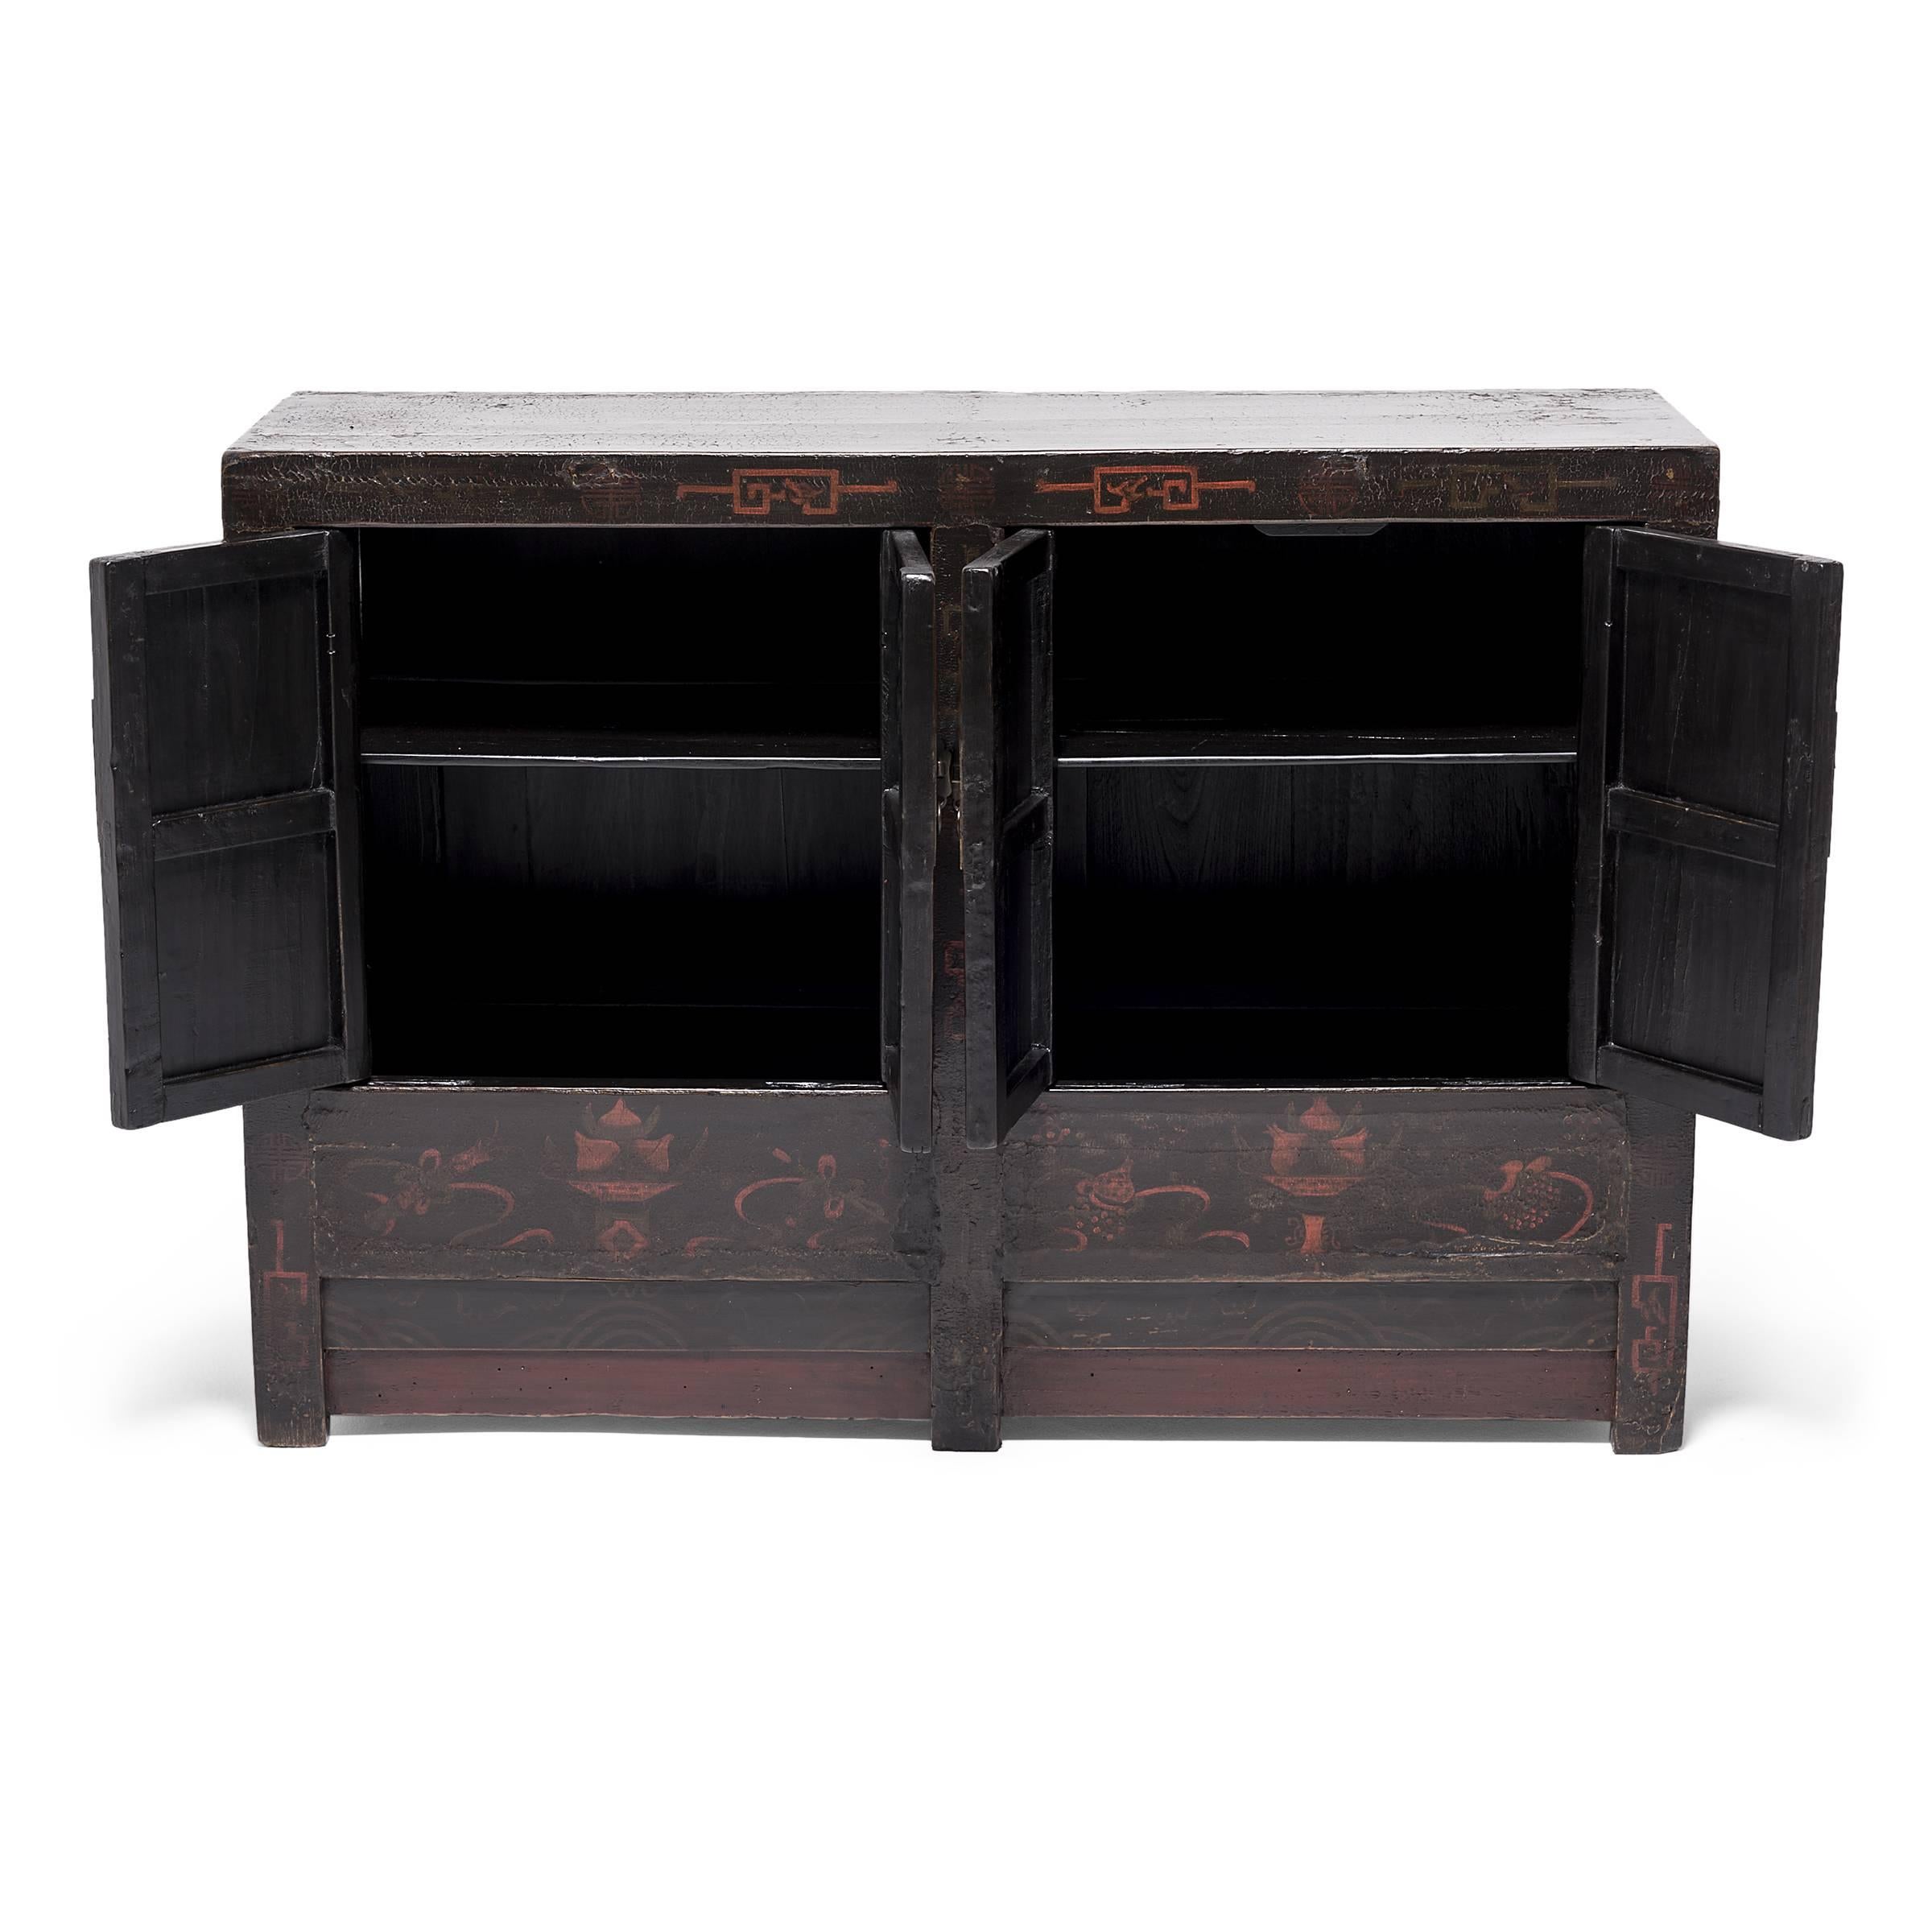 Referencing the 16th century Garden of Cultivation in Suzhou province, this chest’s painted panels depict an intimate interpretation of this inspirational site. The actual garden epitomizes traditional Ming-dynasty garden design with enlightened